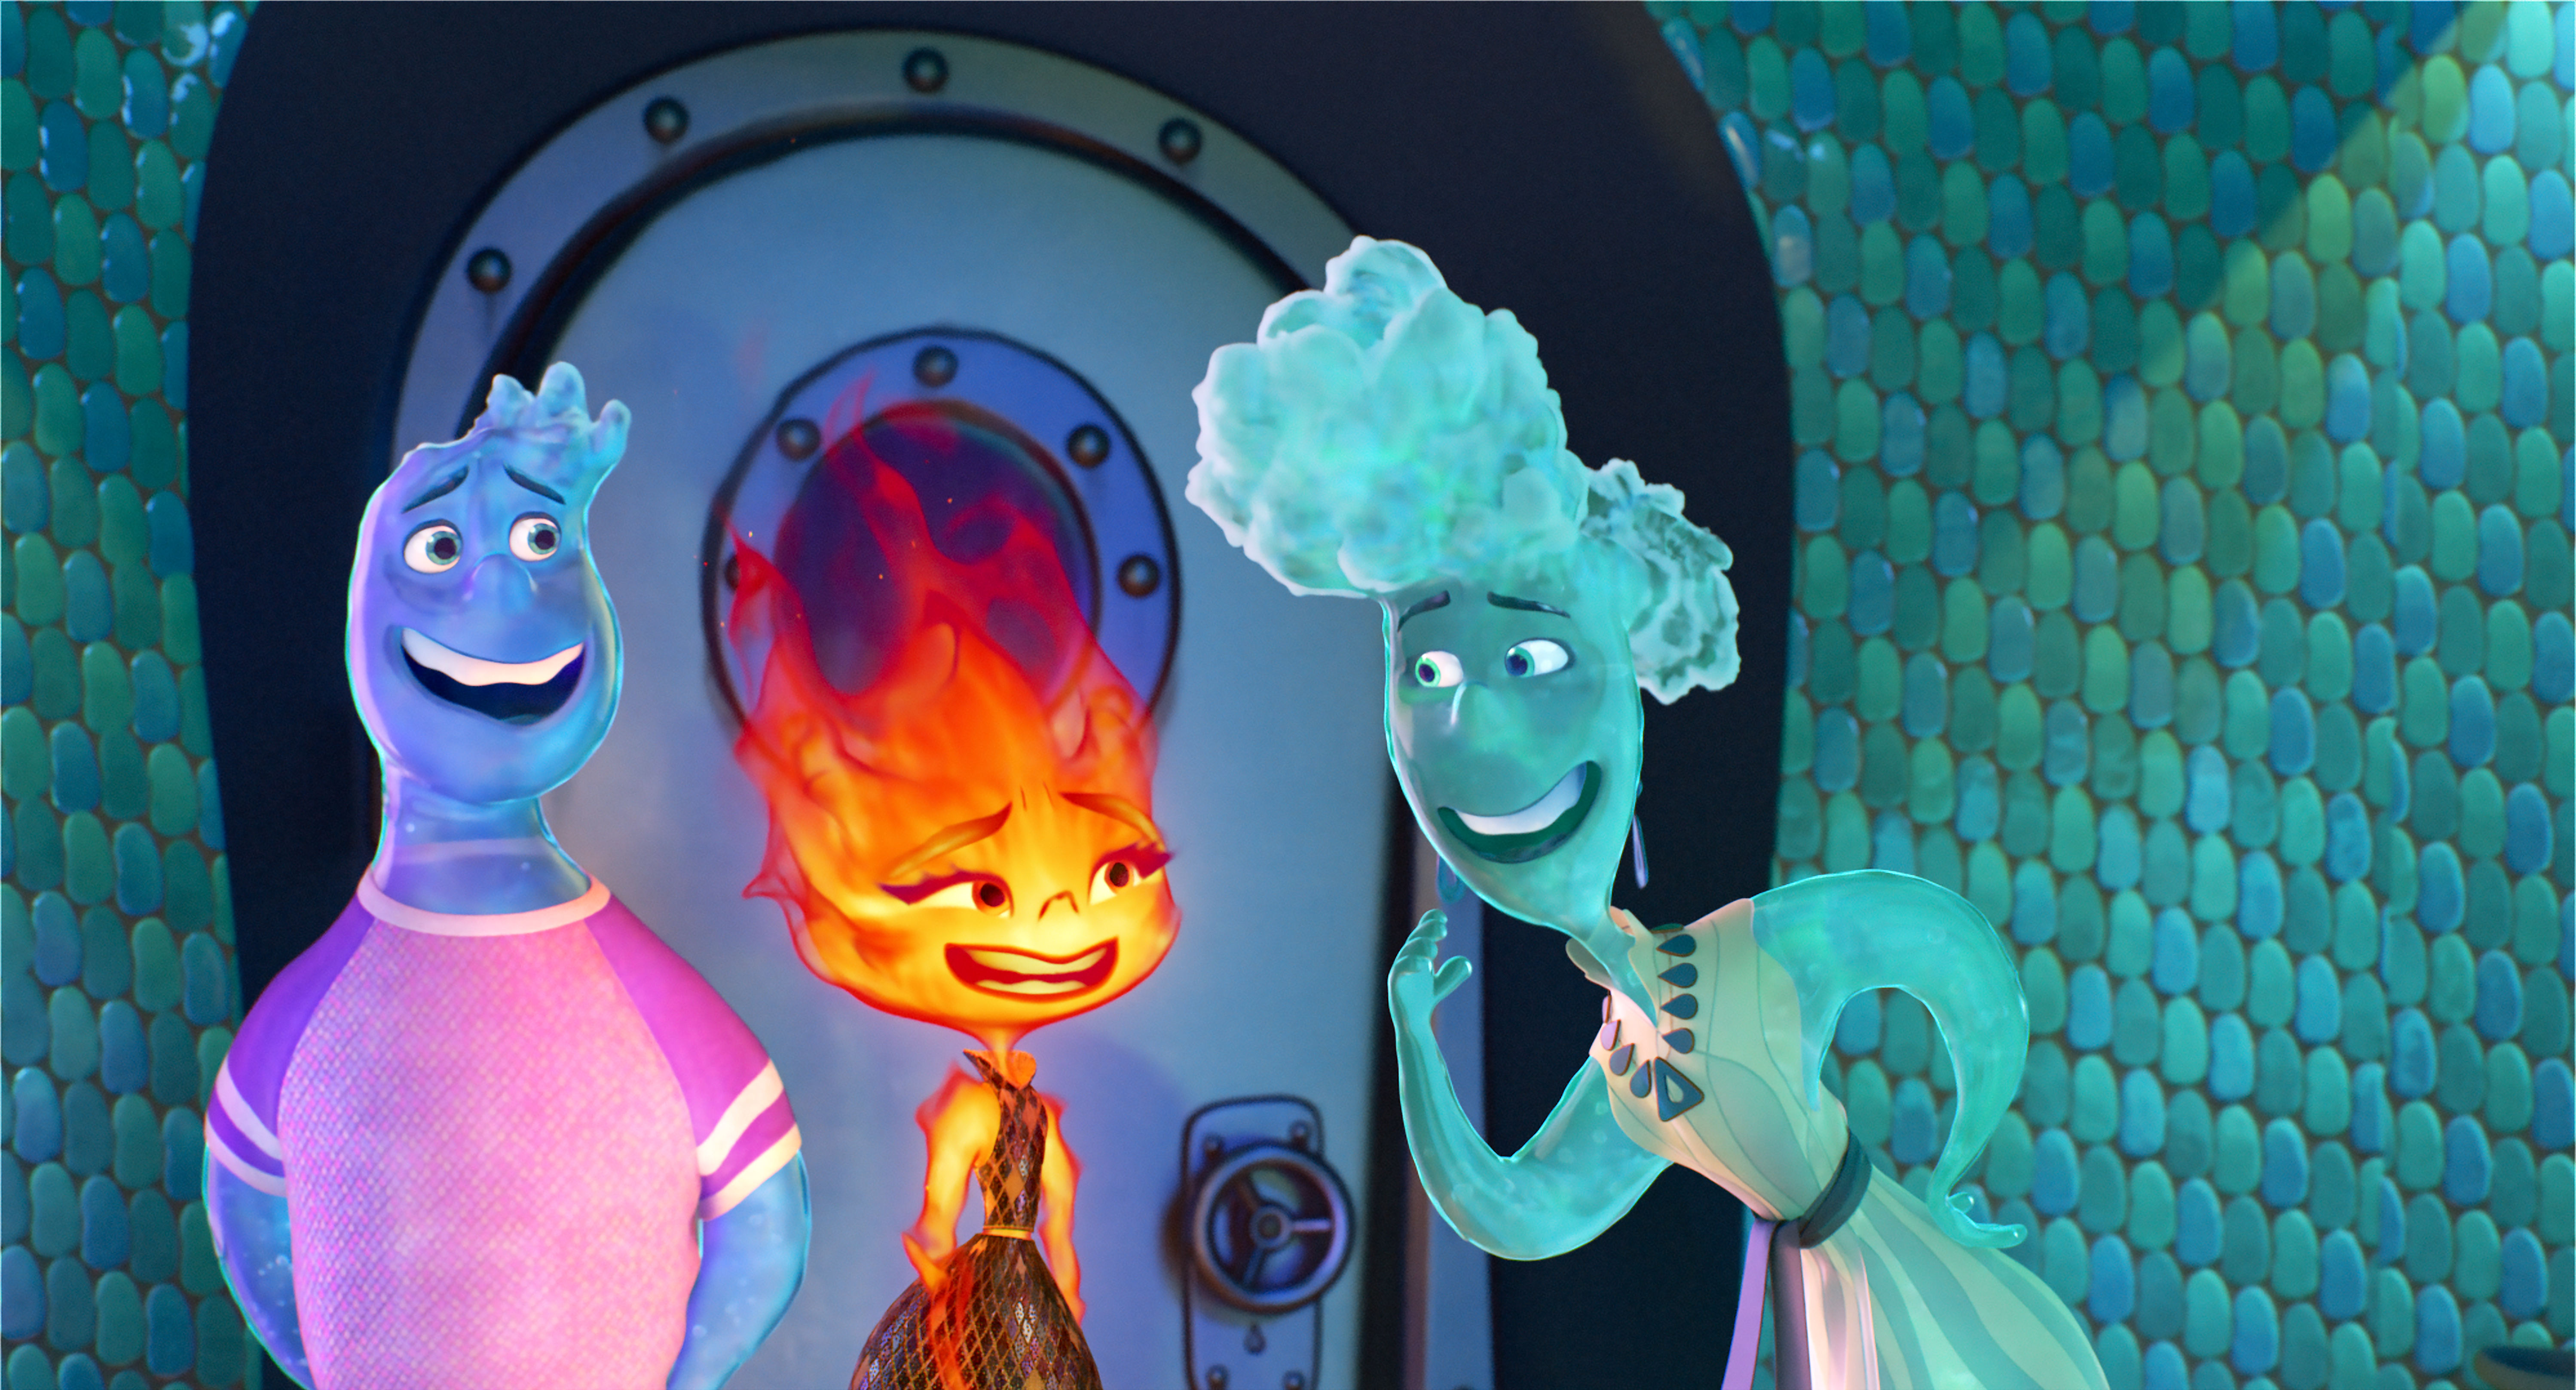 MEET MY MOM -- In Disney and Pixar’s “Elemental,” go-with-the-flow guy Wade (Mamoudou Athie) introduces fiery young woman Ember (voice of Leah Lewis) to his mom, Brook (voice of Catherine O’Hara). Ember is decidedly out of her element, but quickly warms up to his family. Directed by Peter Sohn (“The Good Dinosaur,” “Party Cloudy” short) and produced by Denise Ream (“The Good Dinosaur,” “Cars 2”), Disney and Pixar’s “Elemental” releases on June 16, 2023. © 2023 Disney/Pixar. All Rights Reserved.